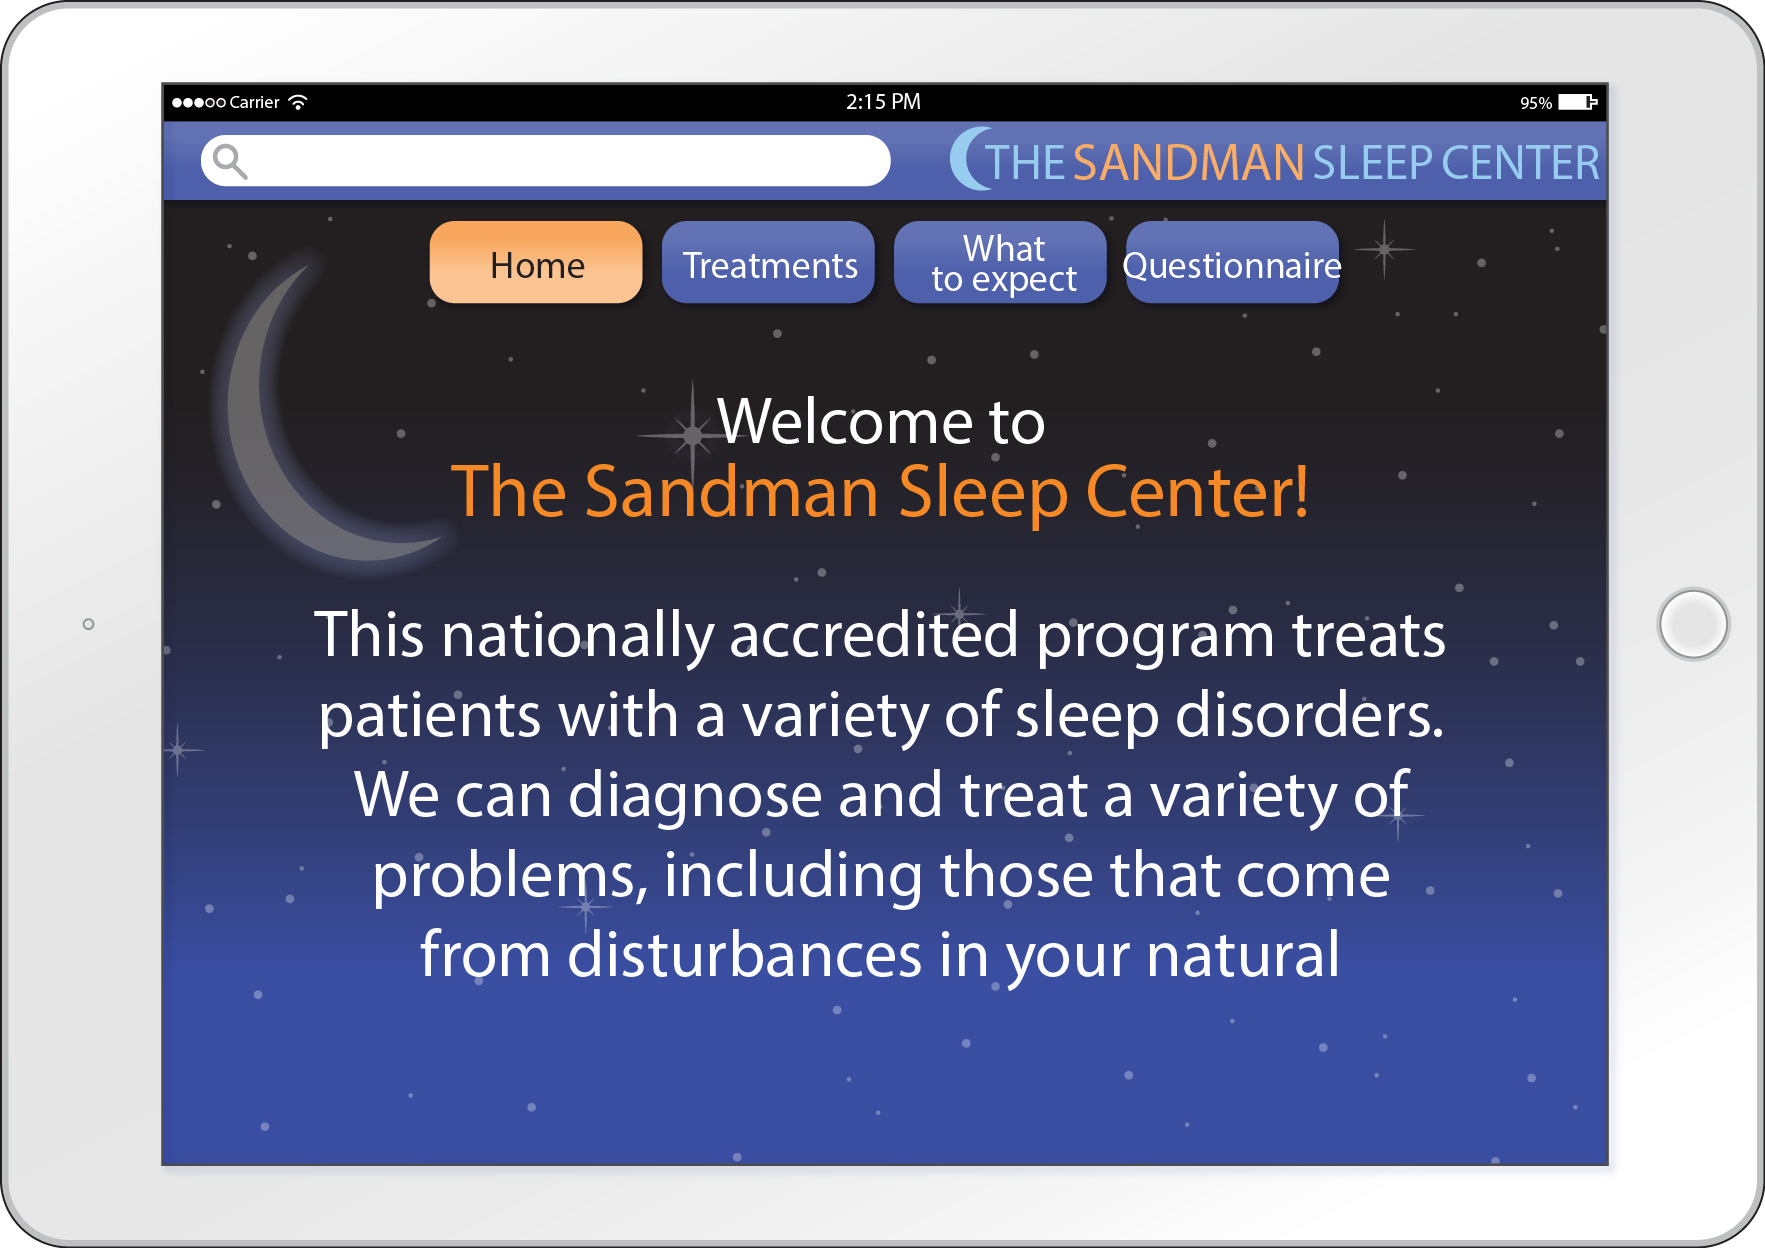 The homepage of the website of The sandman sleep center. The page contains four tabs: home, treatments, what to expect, and questionnaire.